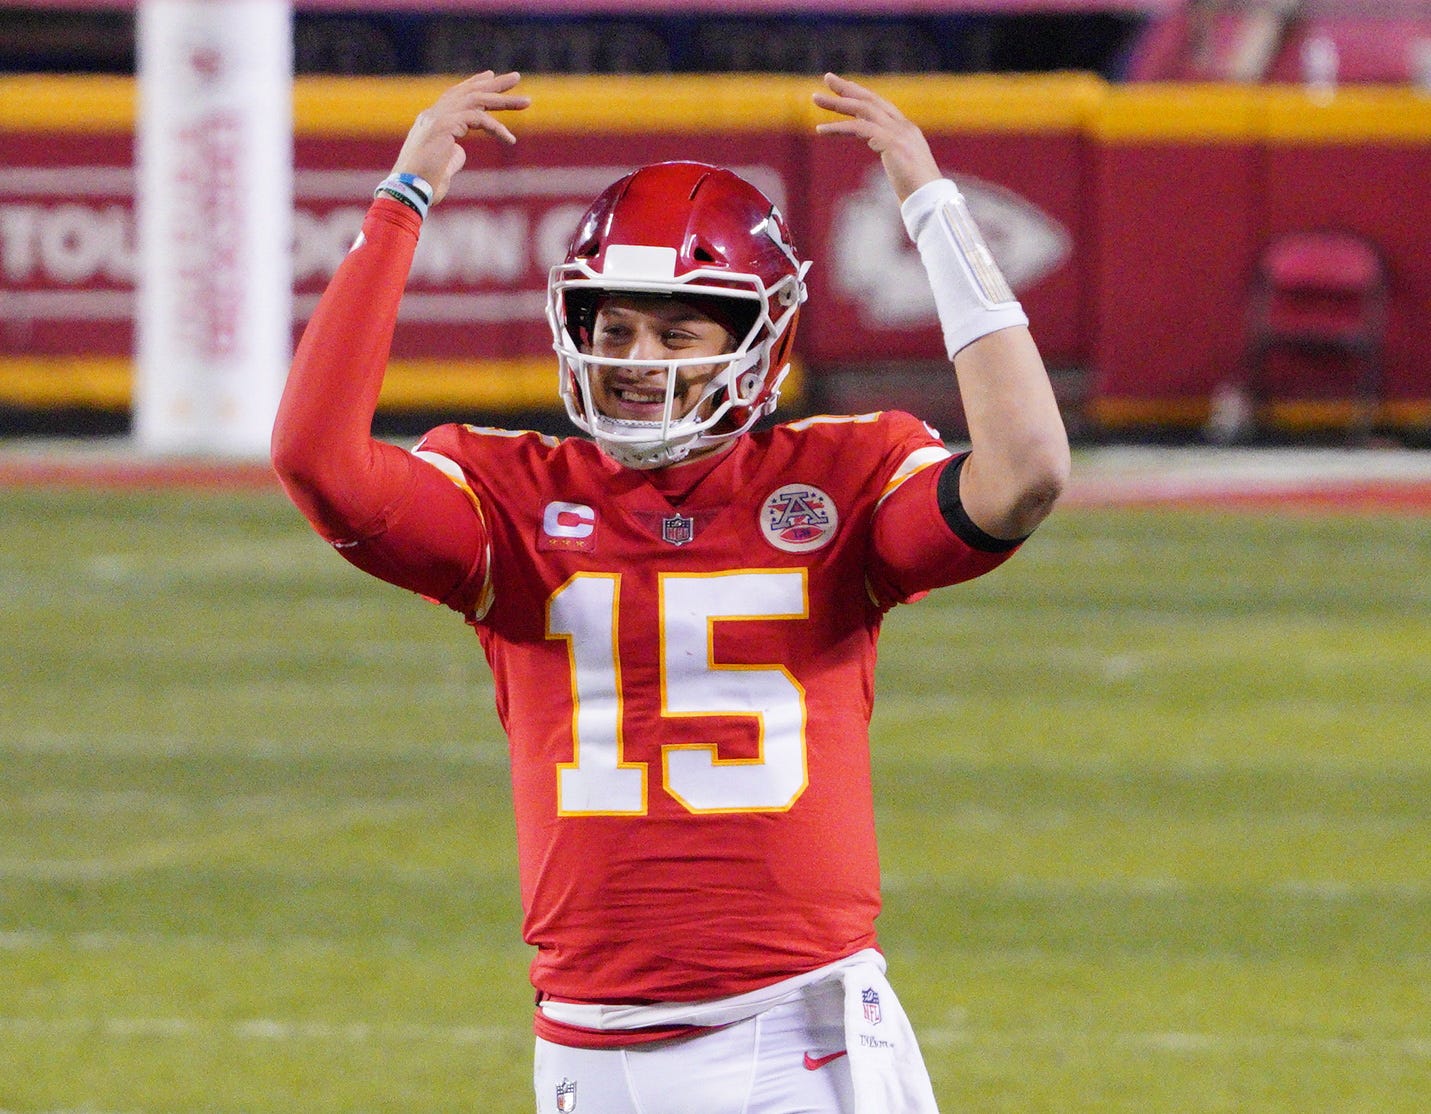 Opinion: Patrick Mahomes leads Chiefs to another Super Bowl with plenty of grit to go with his sizzle